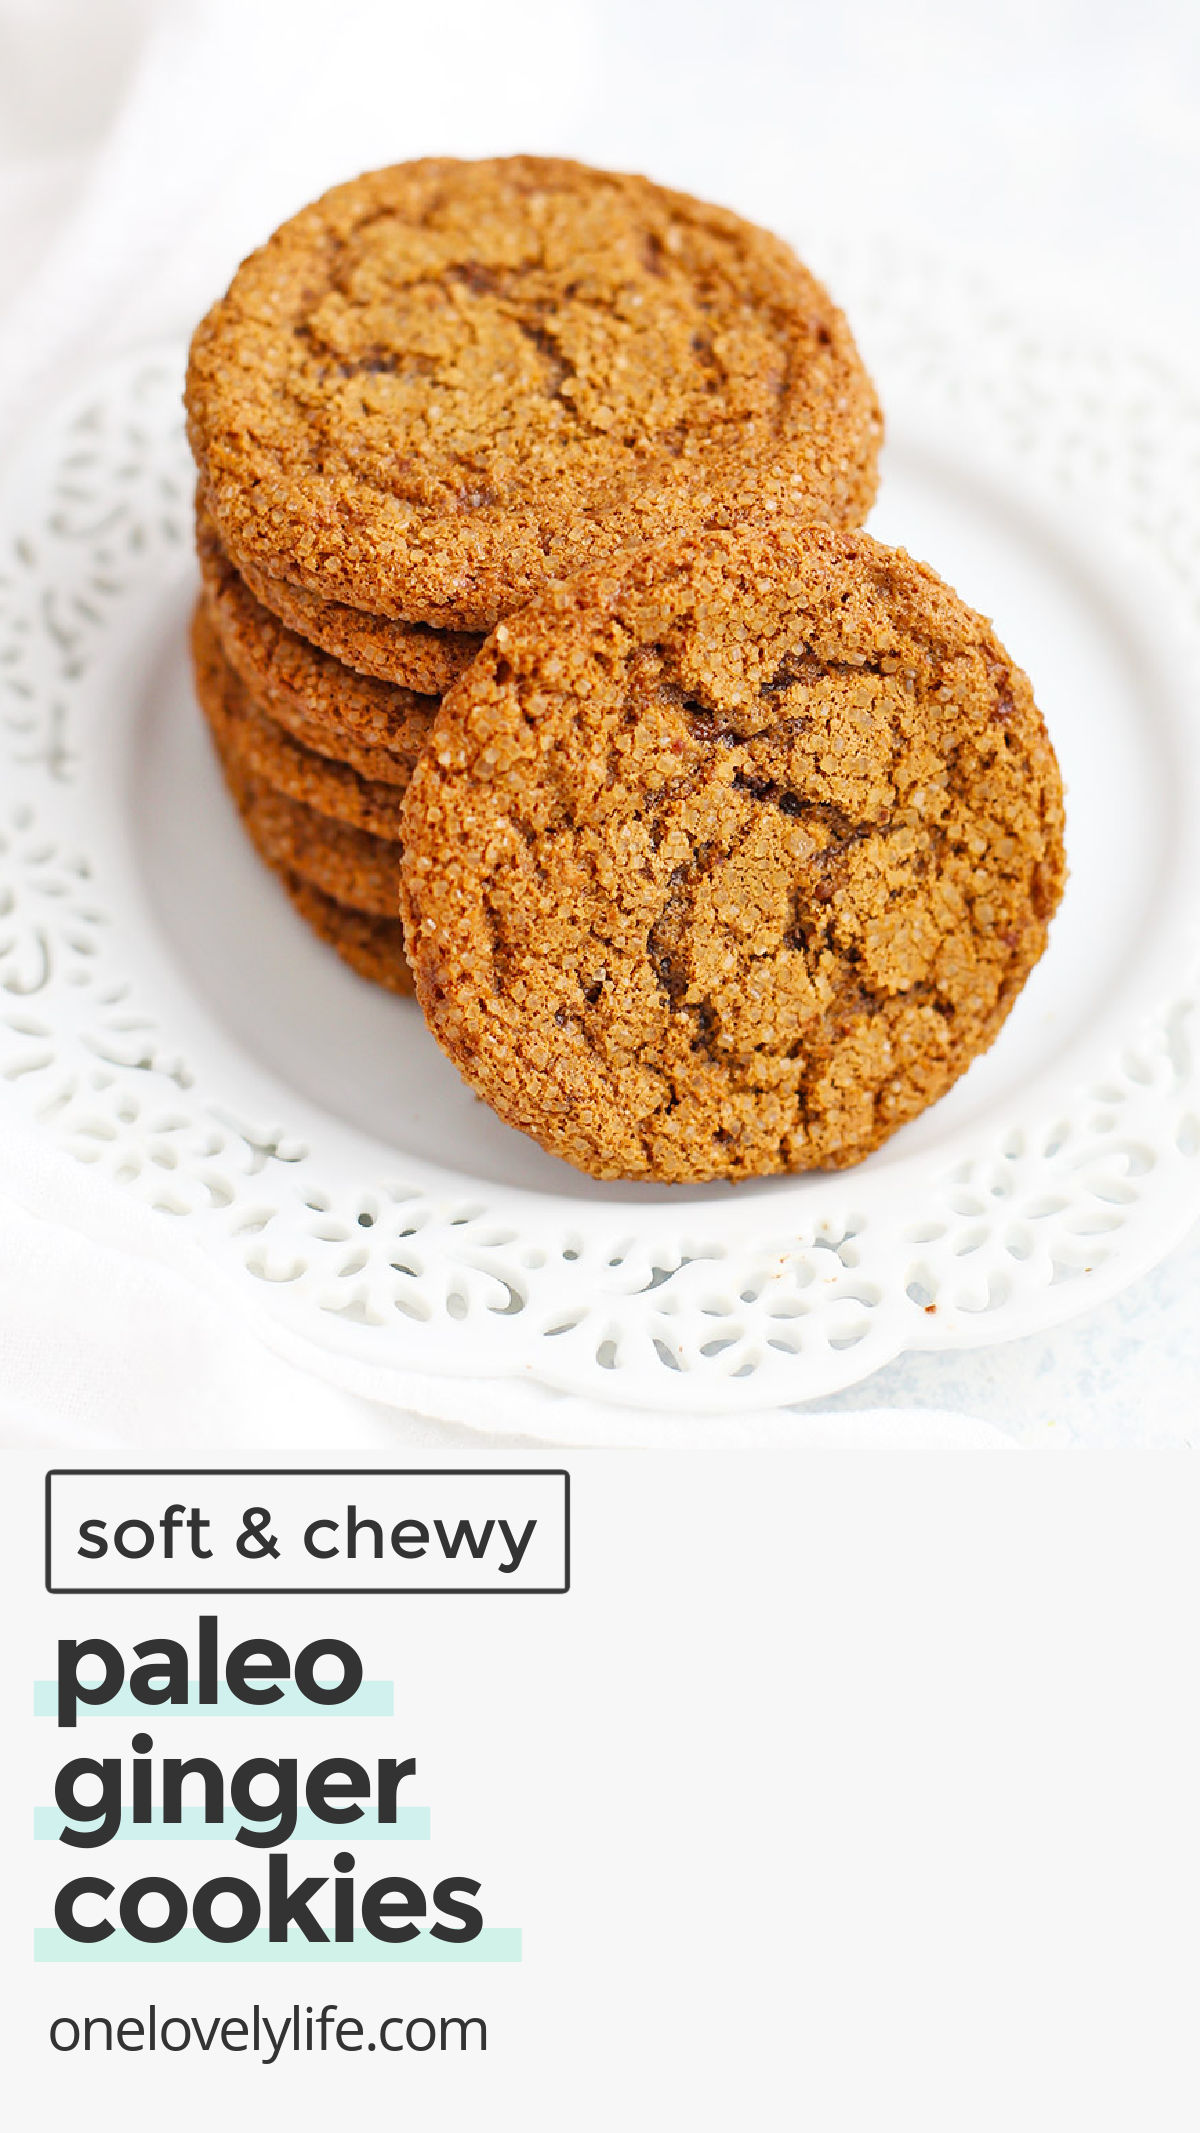 Paleo Ginger Cookies - These gluten free ginger cookies are crisp on the edges and perfectly tender inside. We LOVE THEM! // Paleo Gingersnaps // Gluten free ginger cookies // gluten free gingersnaps // paleo holiday cookie recipe // gluten free gingersnap cookies / almond flour ginger cookies / almond flour gingersnaps